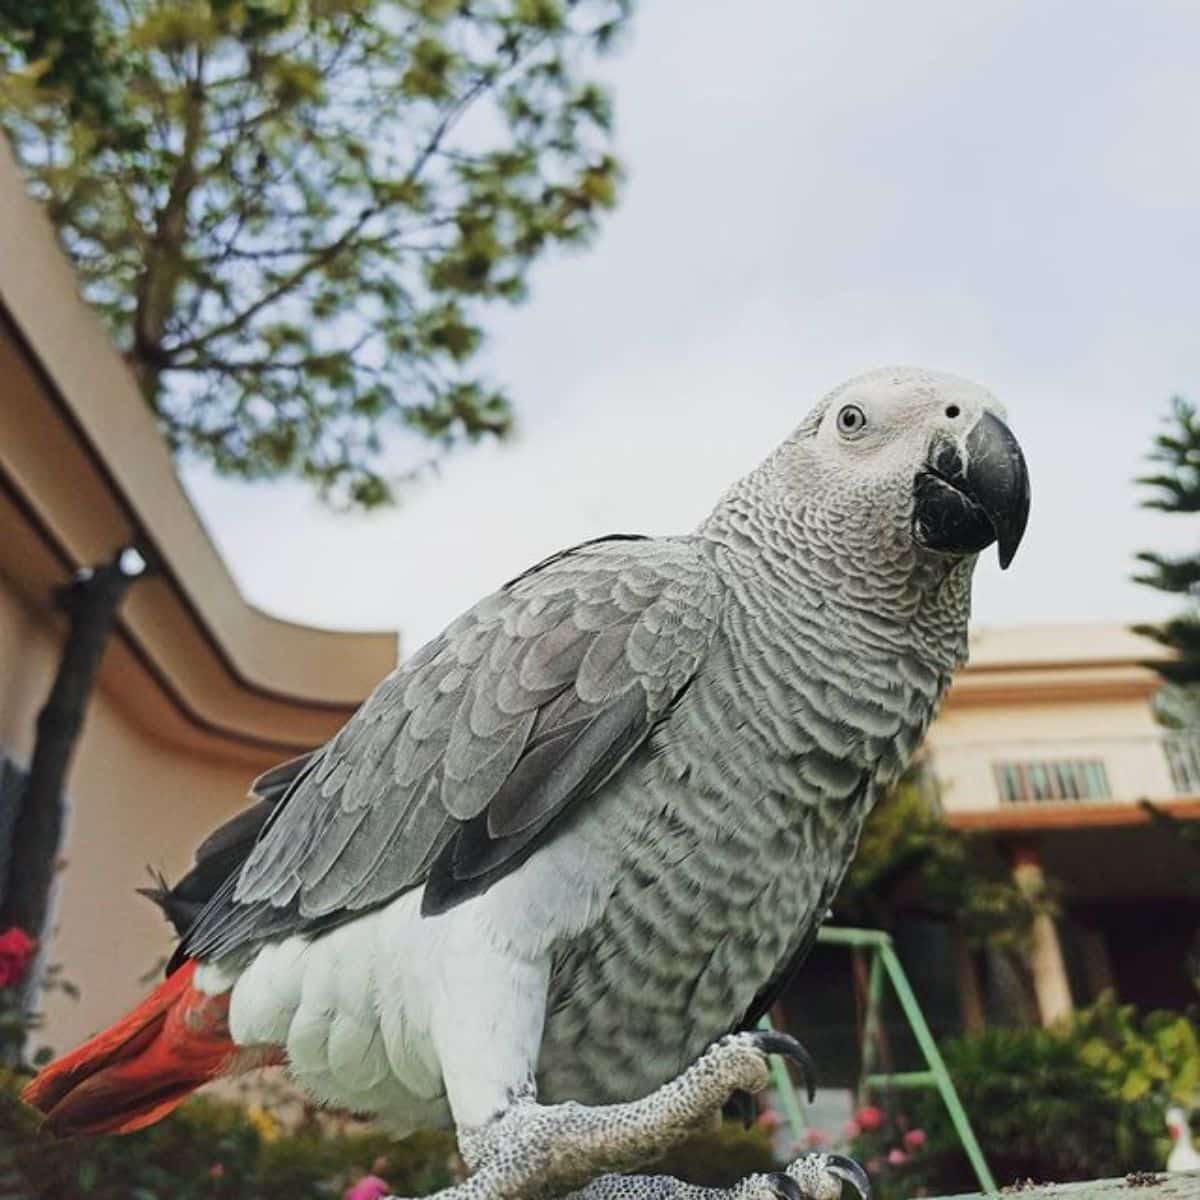 A beautiful African Gray Parrot perched in a backyard.